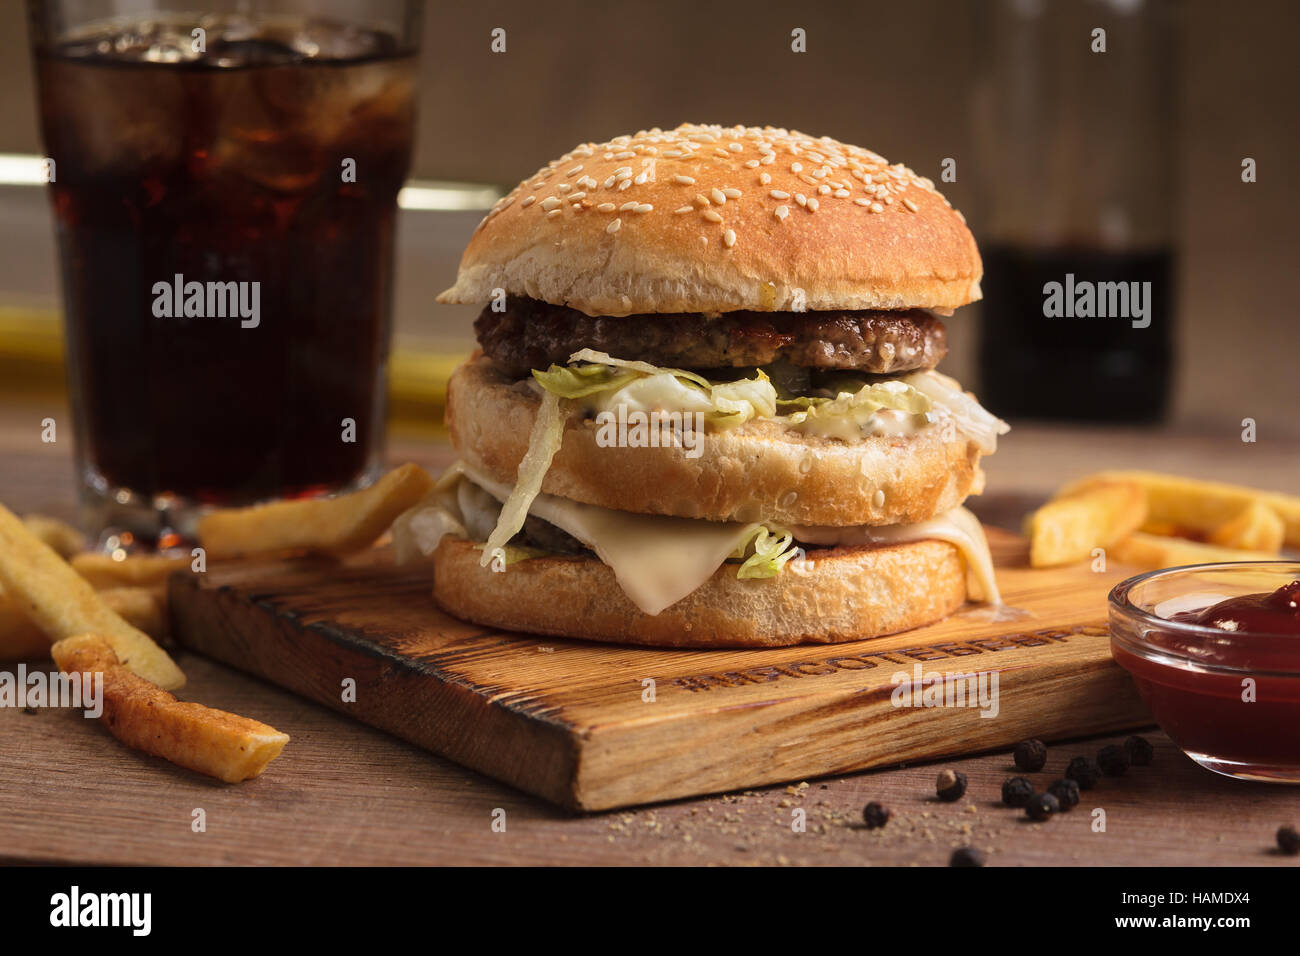 Concept: restaurant menus, healthy eating, homemade, gourmands, gluttony. Classic beef double burger with ingredients, drinks and french fries on mess Stock Photo